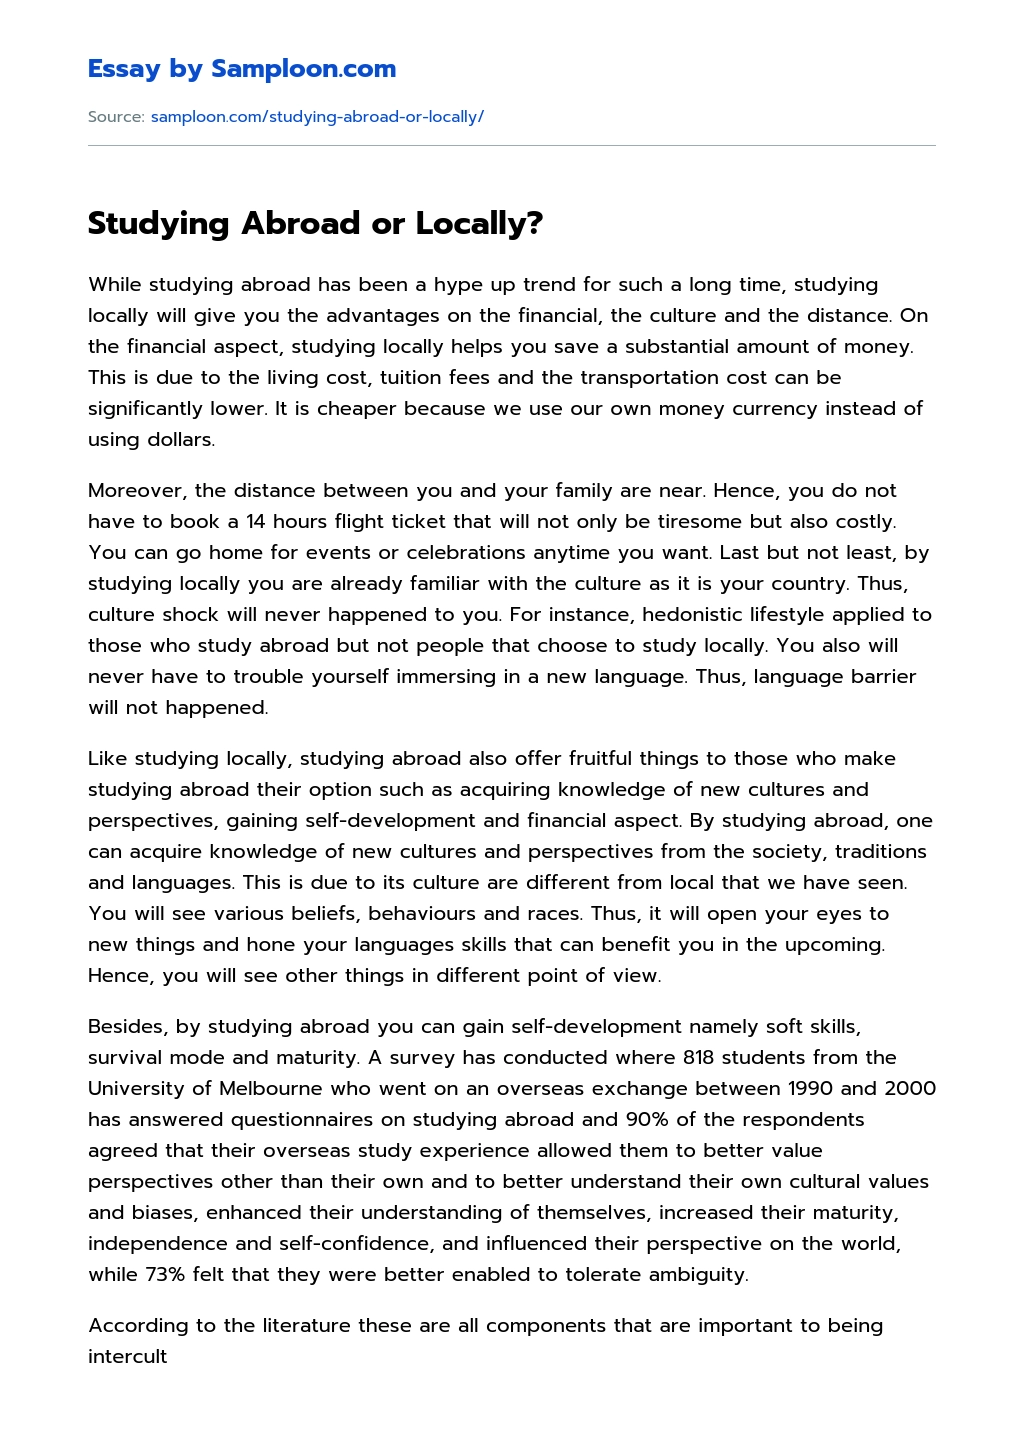 Studying Abroad or Locally? essay